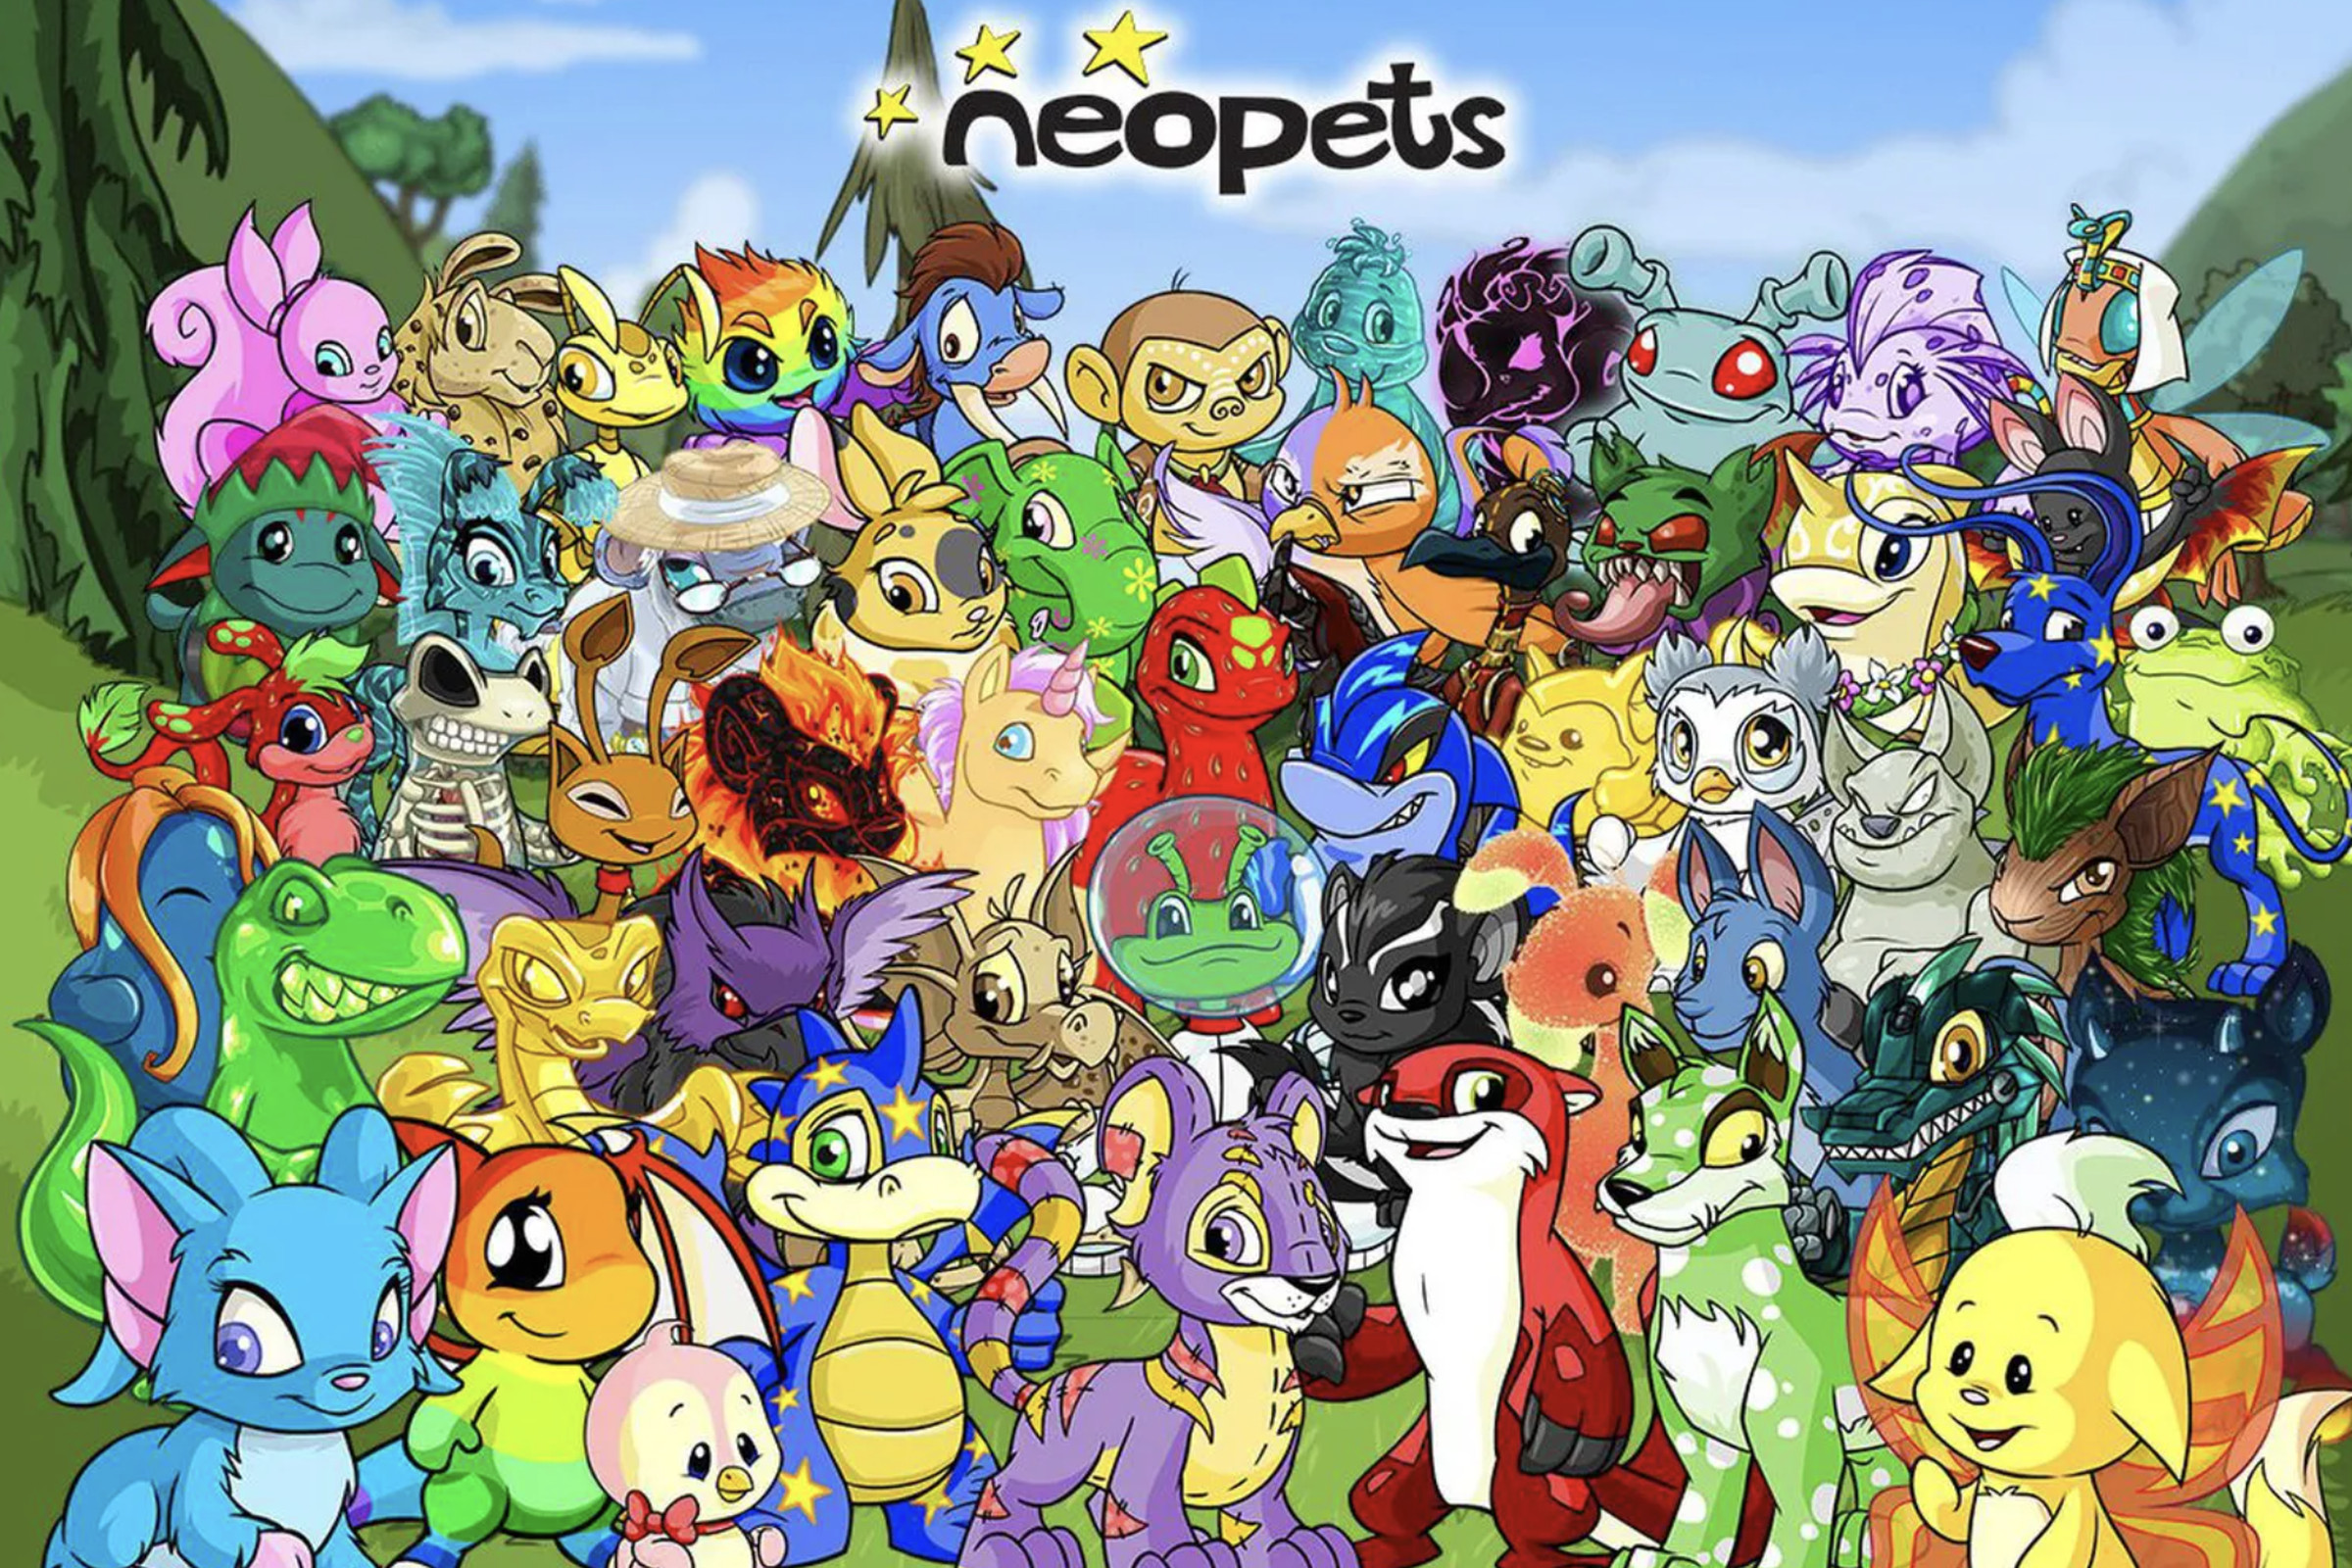 Characters from the popular Neopets game